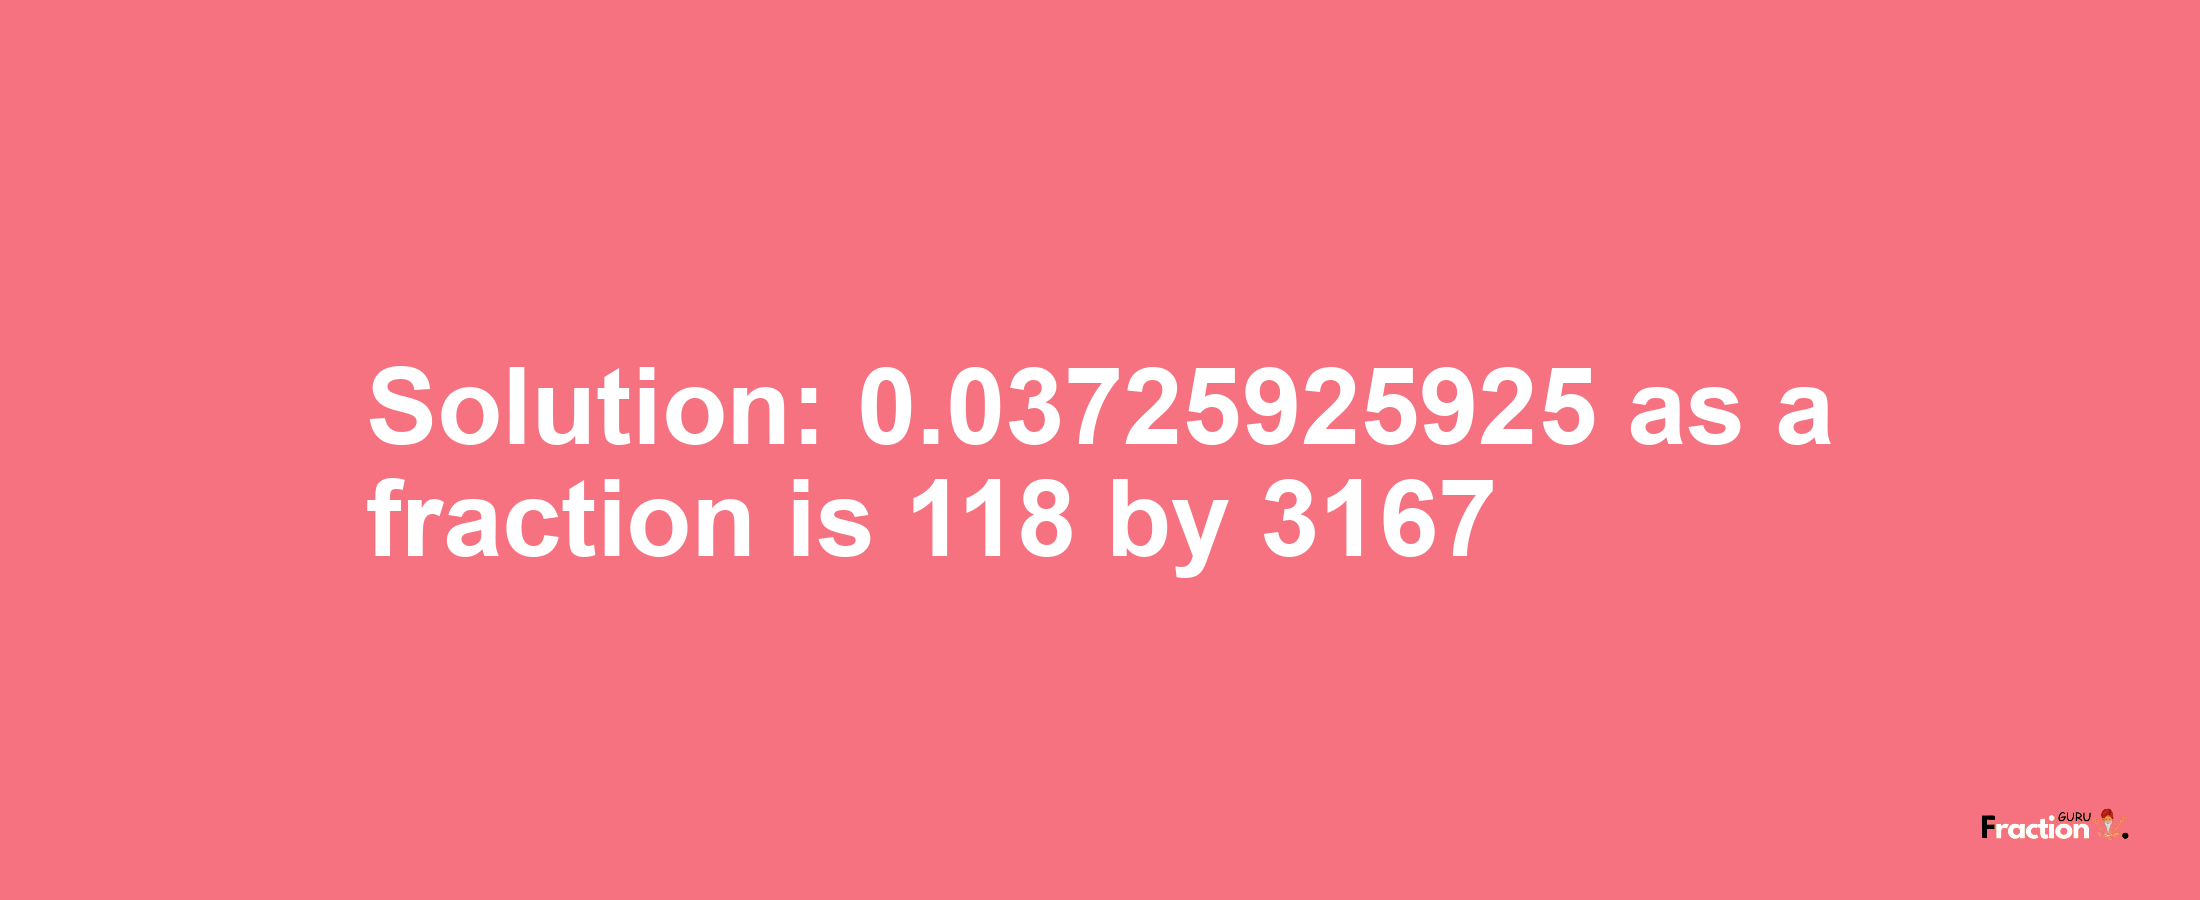 Solution:0.03725925925 as a fraction is 118/3167